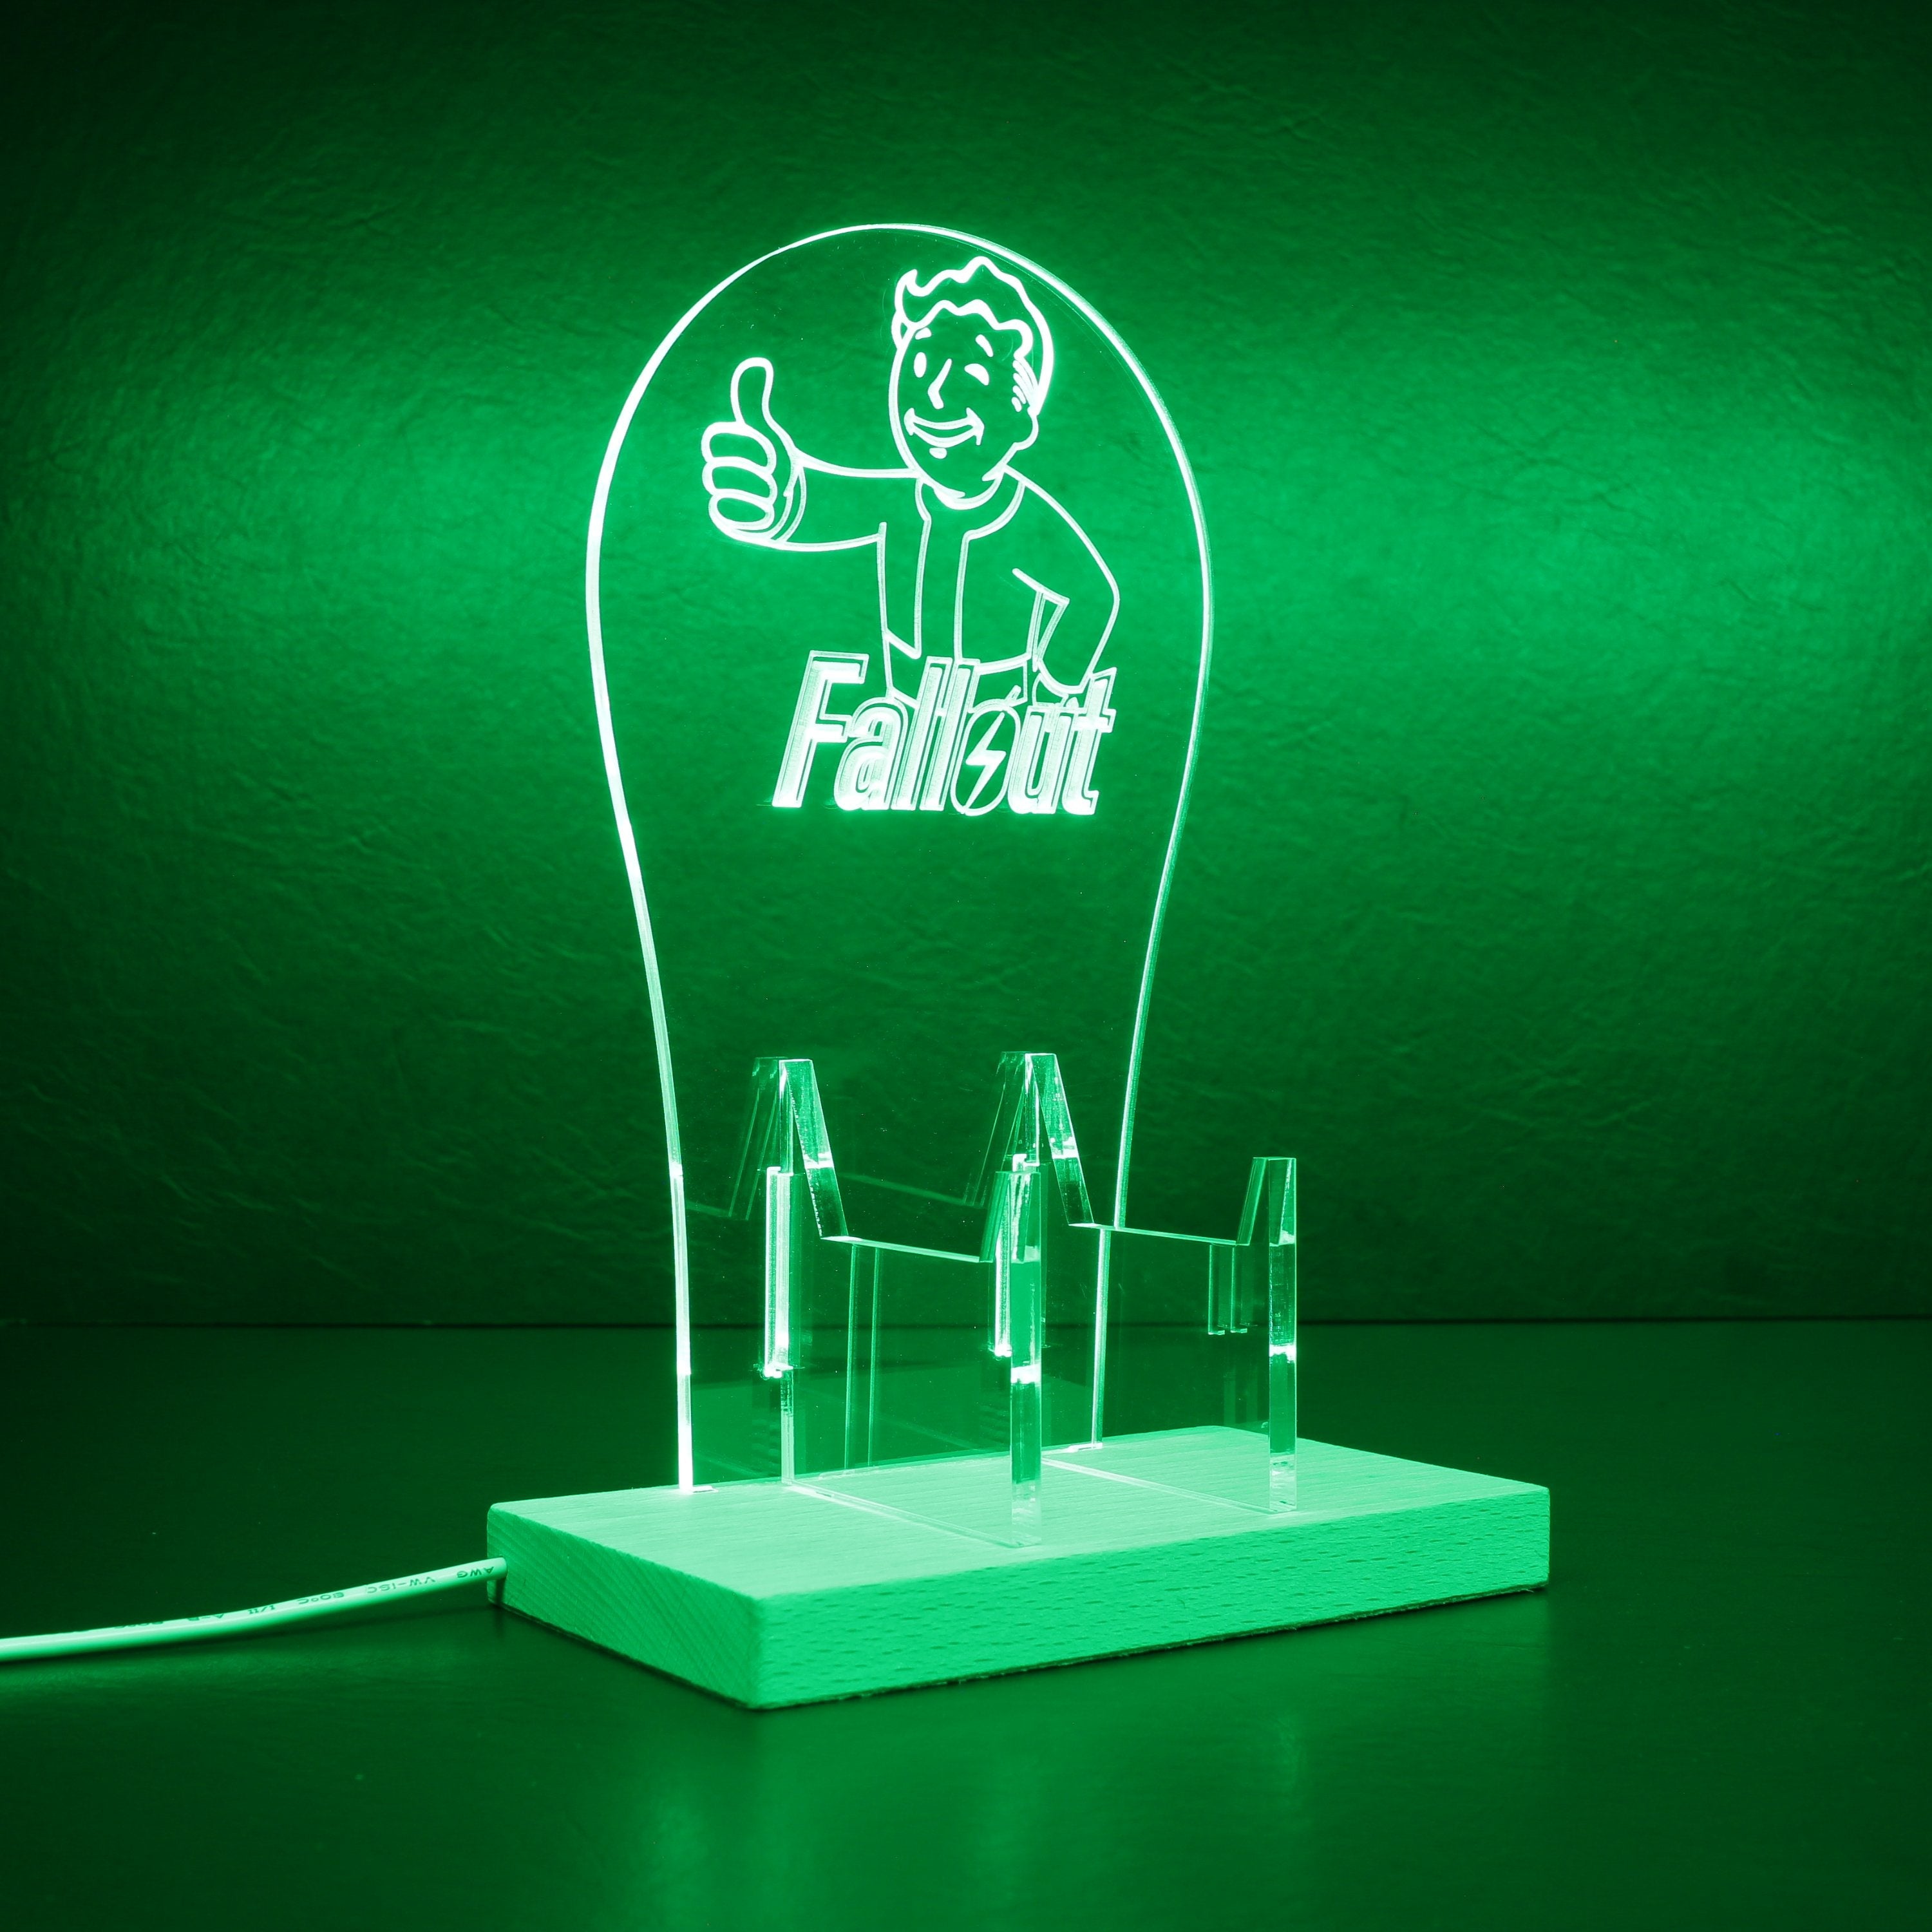 Fallout LED Gaming Headset Controller Stand